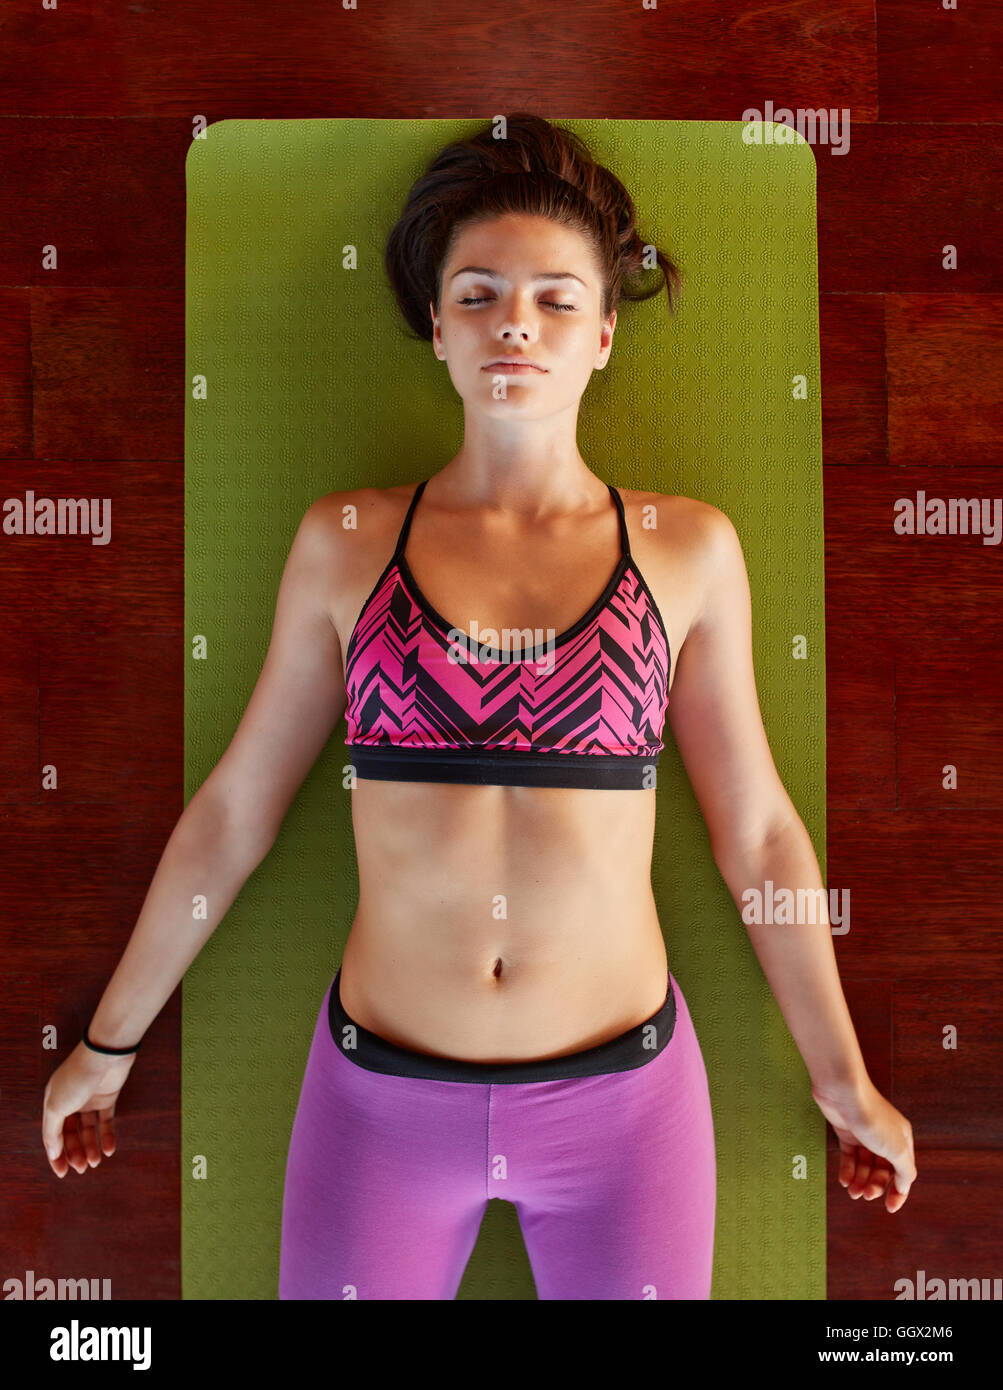 Overhead view of fit young female relaxing on yoga mat. Healthy woman in savasana yoga pose at gym. Stock Photo